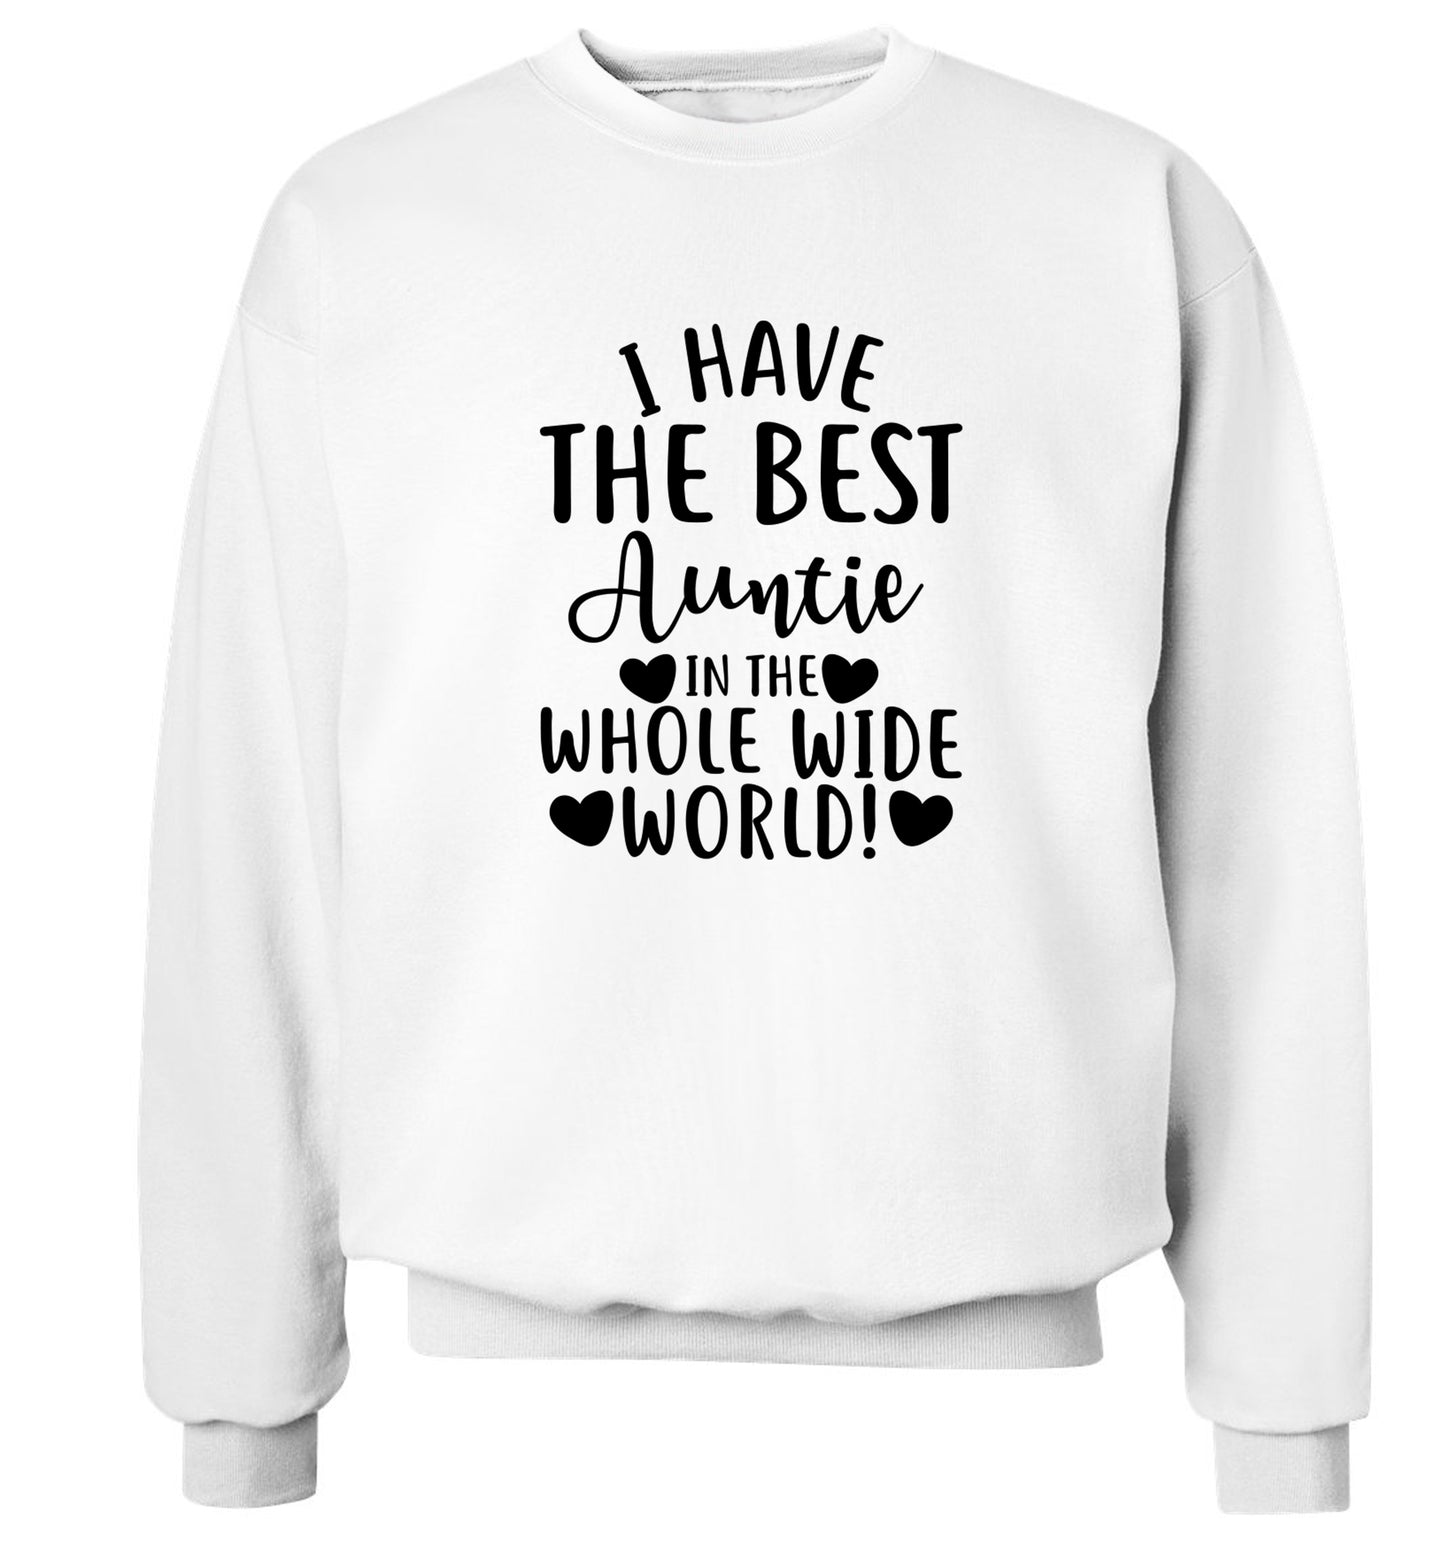 I have the best auntie in the whole wide world! Adult's unisex white Sweater 2XL